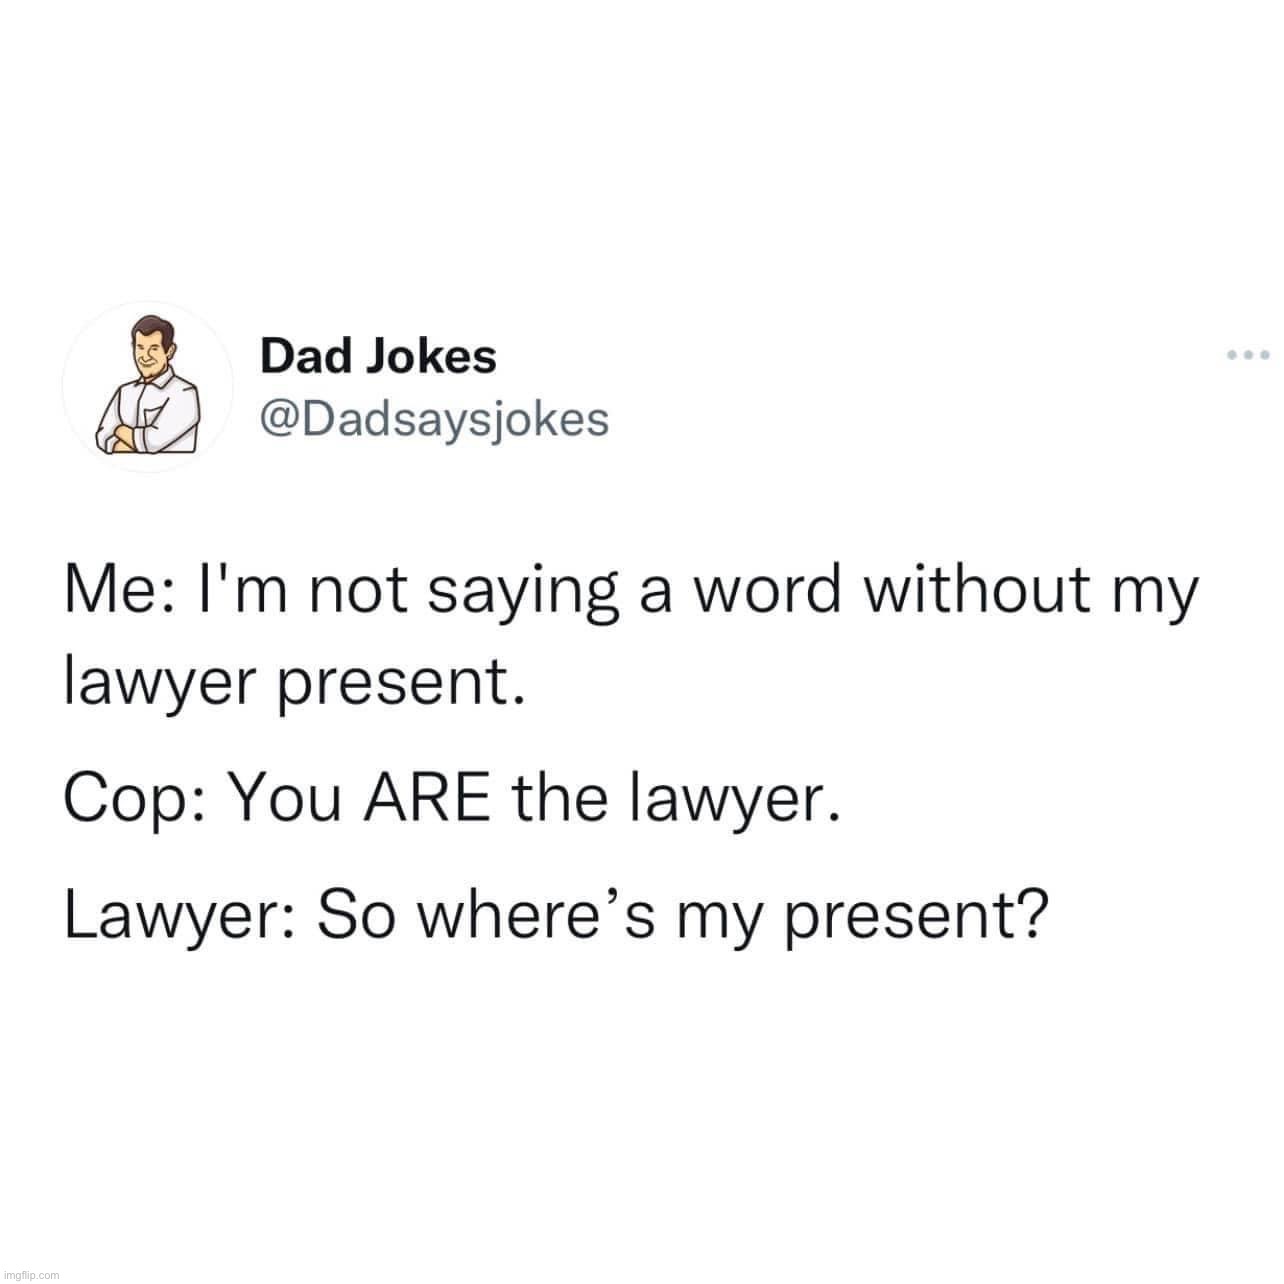 Lawyer present | image tagged in lawyer present | made w/ Imgflip meme maker